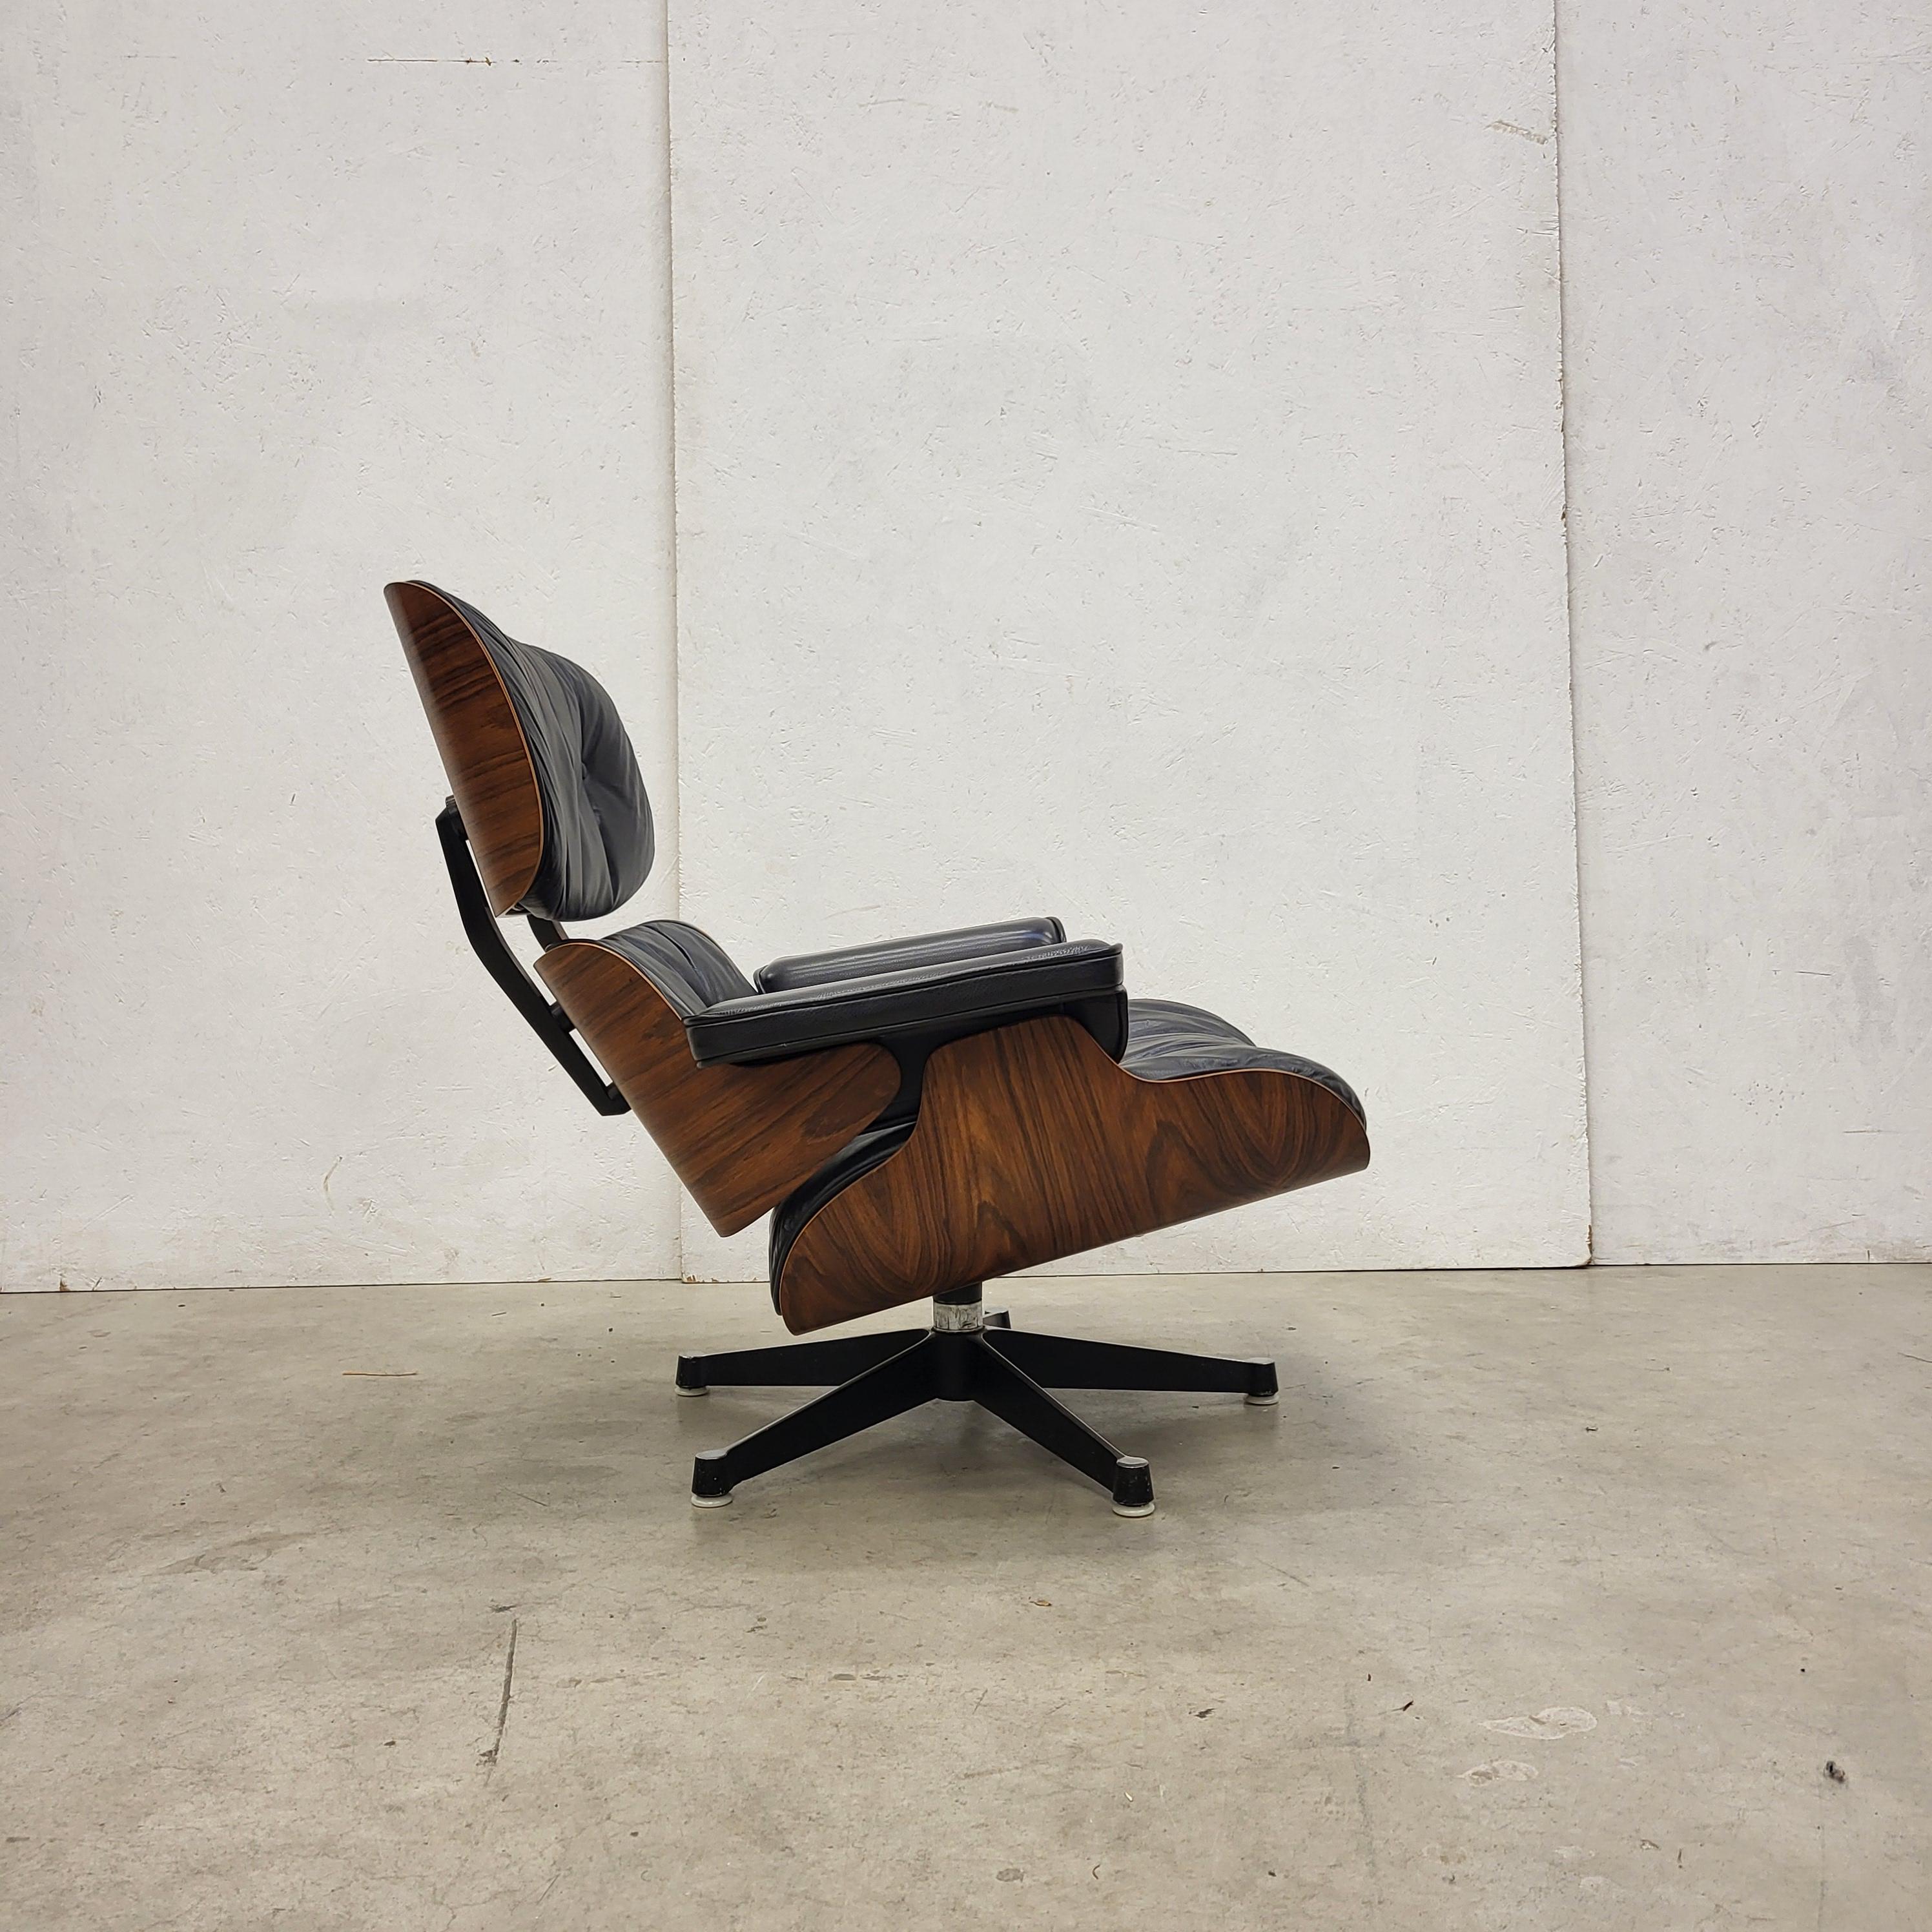 This rare lounge chair was designed by Charles & Ray Eames and were produced by Herman Miller in 1964. It is one of the earlier lounge chairs which were produced in Europe under the license of Vitra.

It is an early example which features overall